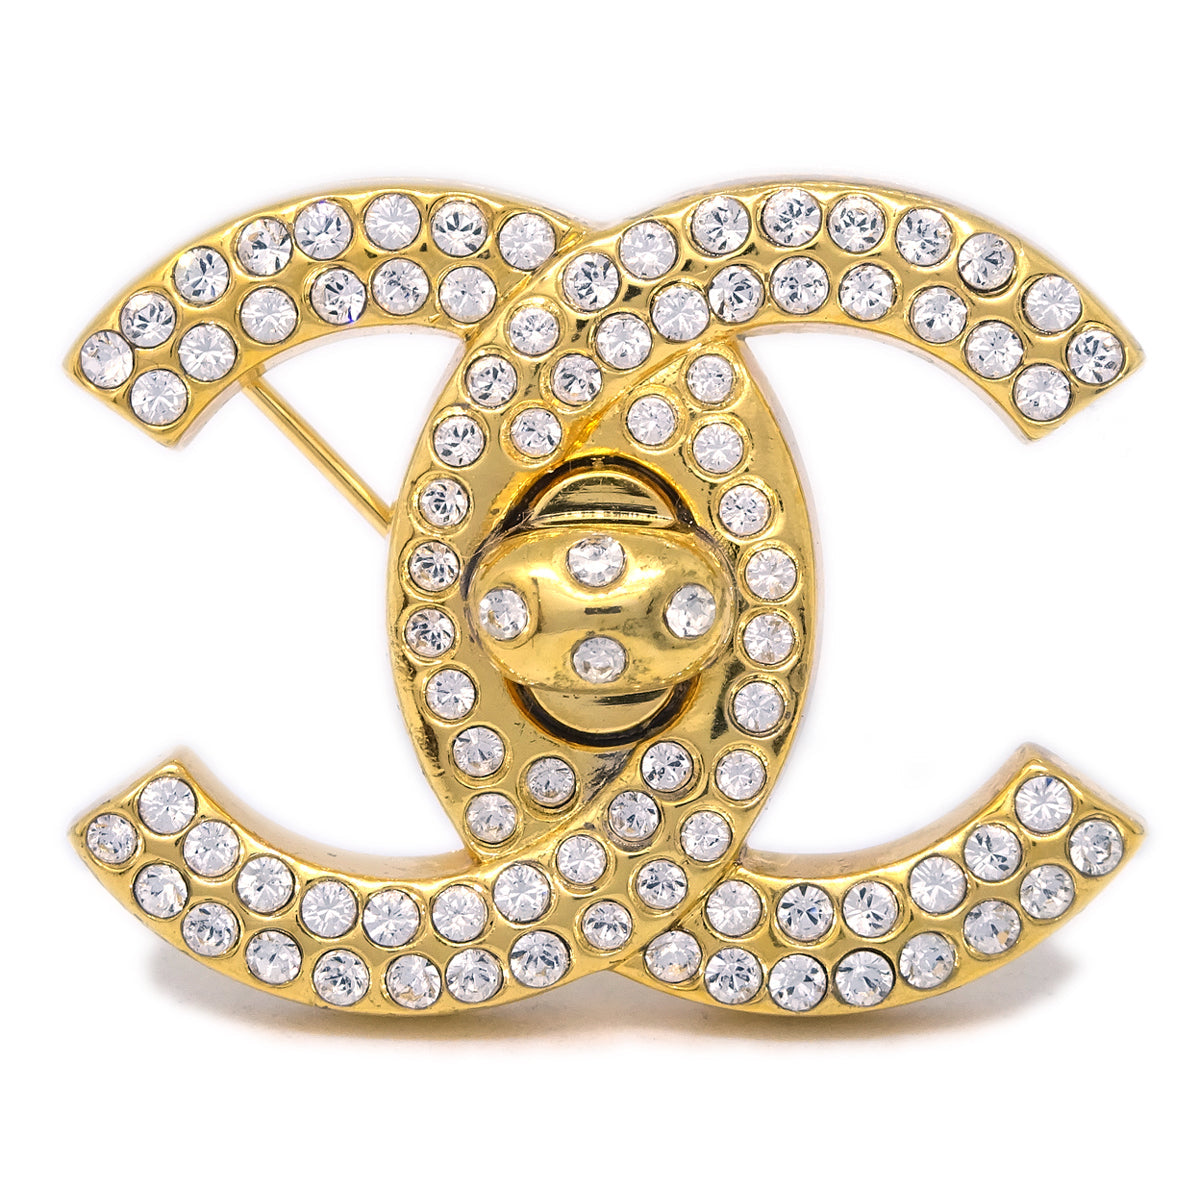 Chanel 1997 Crystal & Gold CC Turnlock Brooch Large